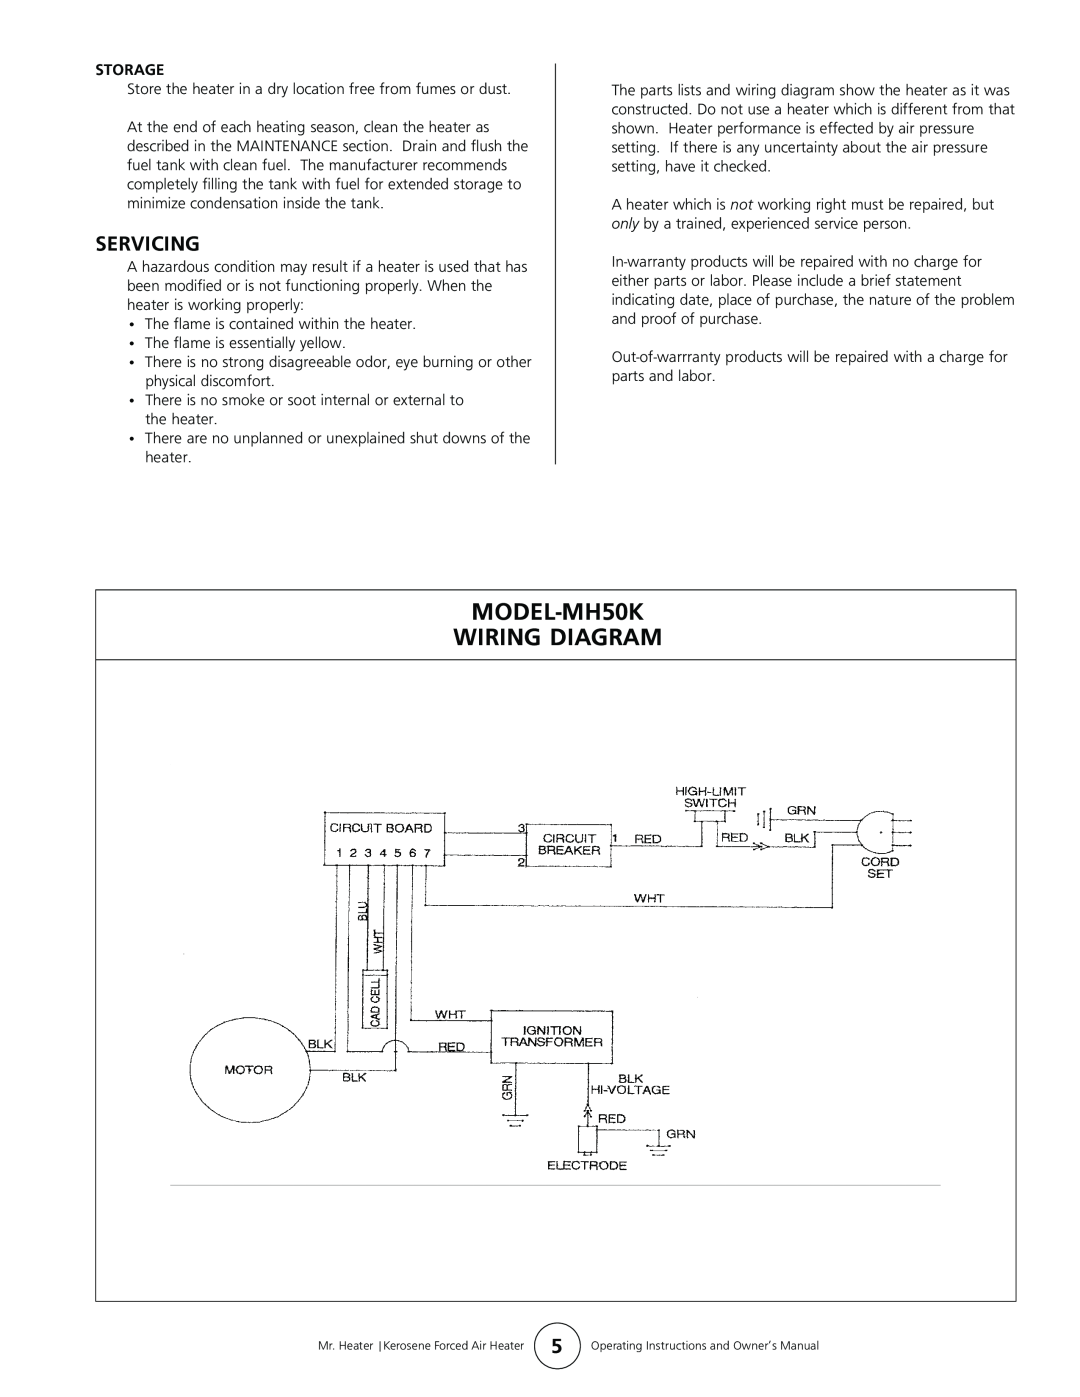 Enerco operating instructions MODEL-MH50K WIRING DIAGRAM, Servicing, Storage 